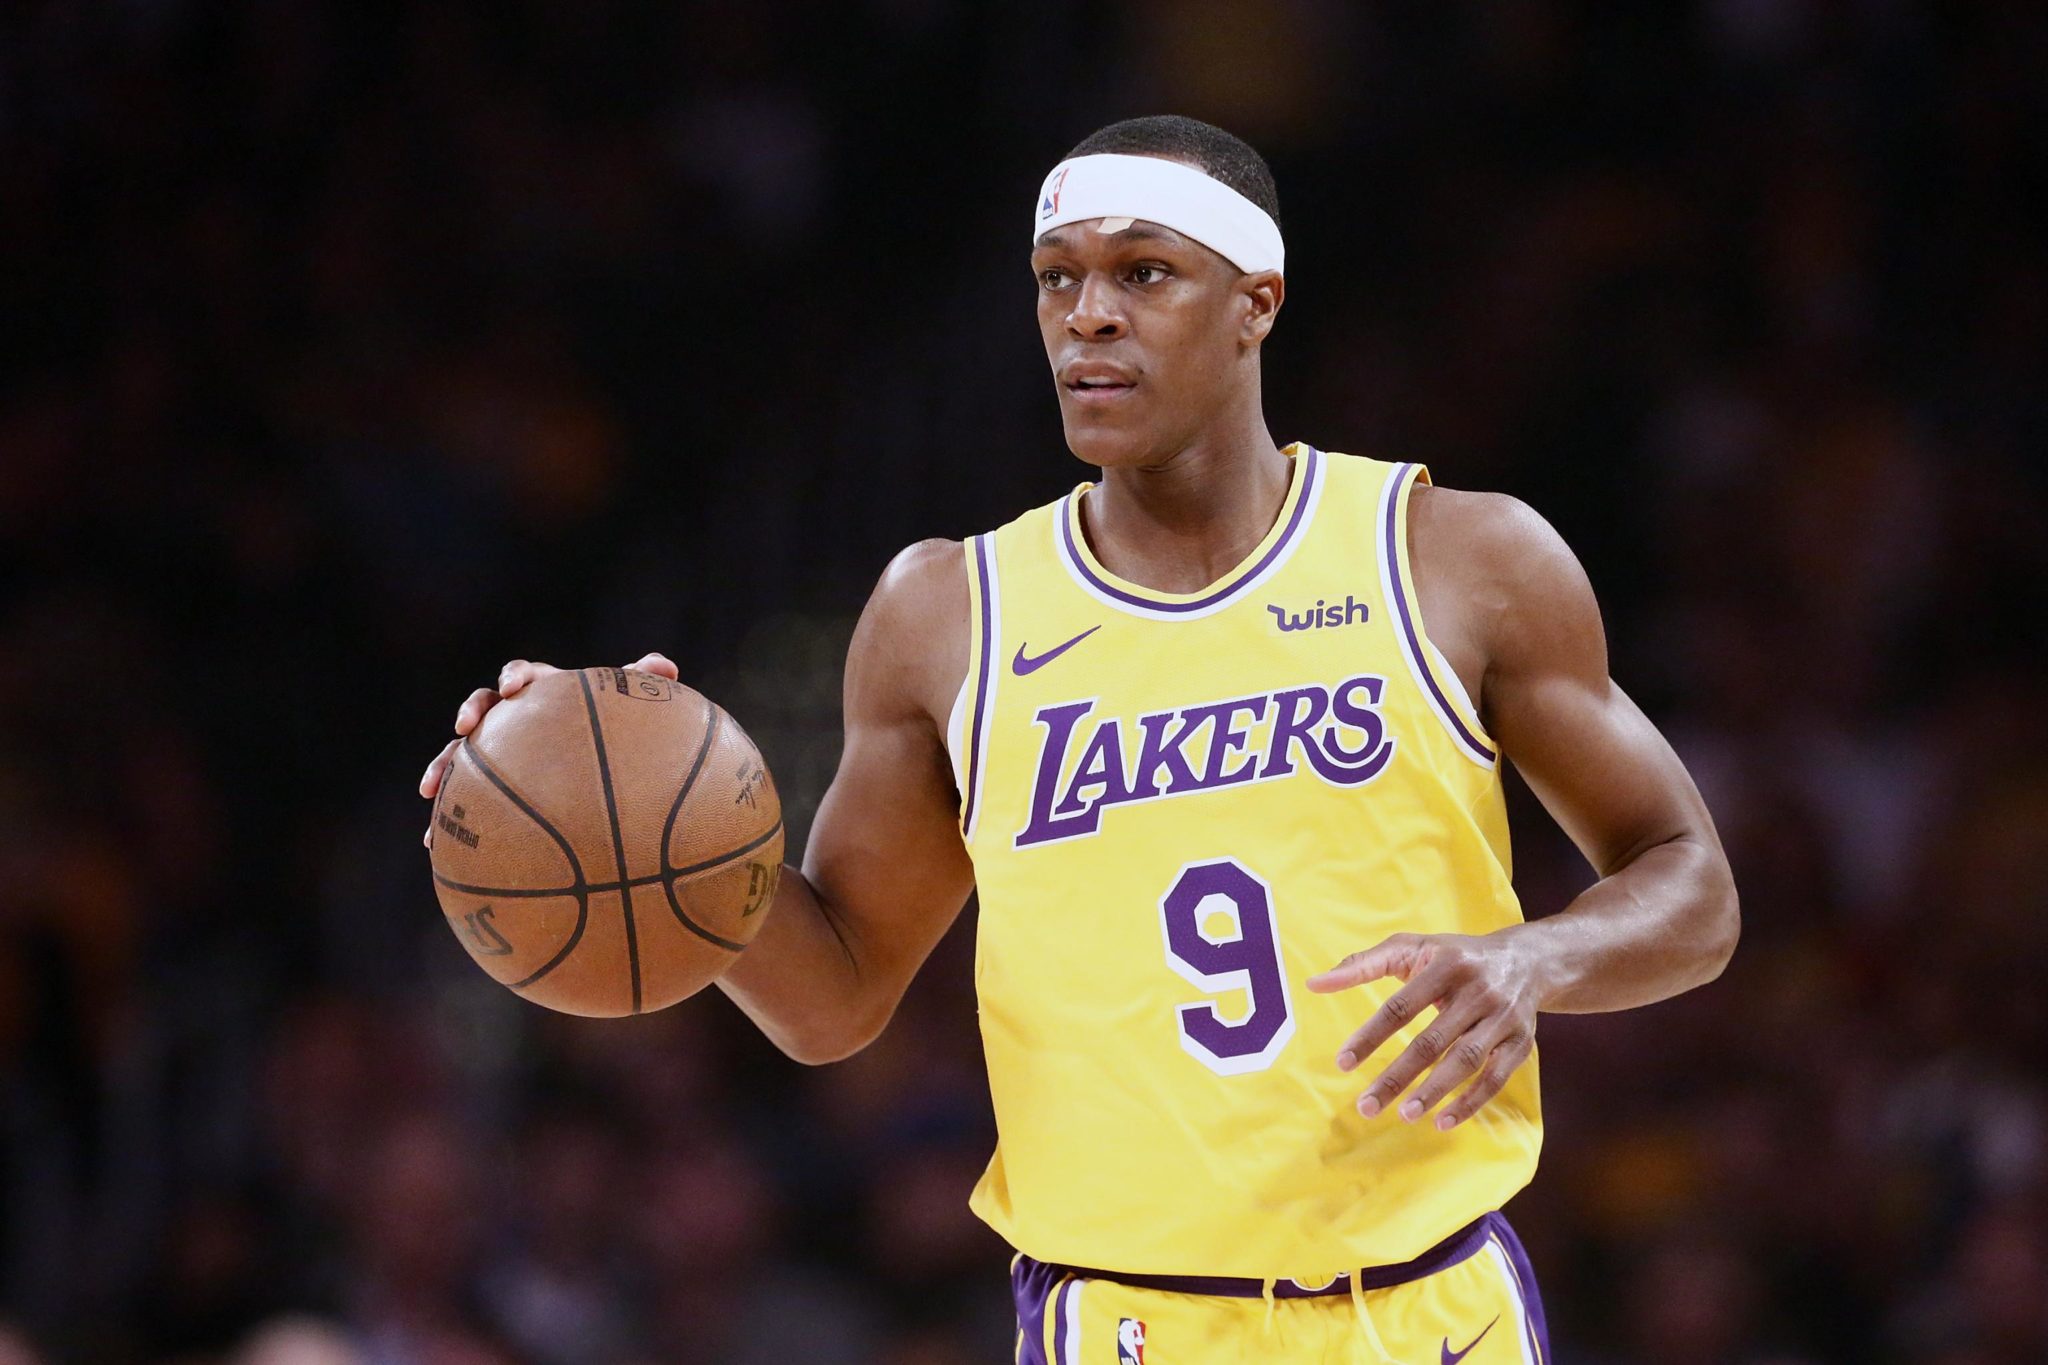 Rajon Rondo Agrees to Buyout With Grizzlies, Plans to Sign With Lakers, Per Report